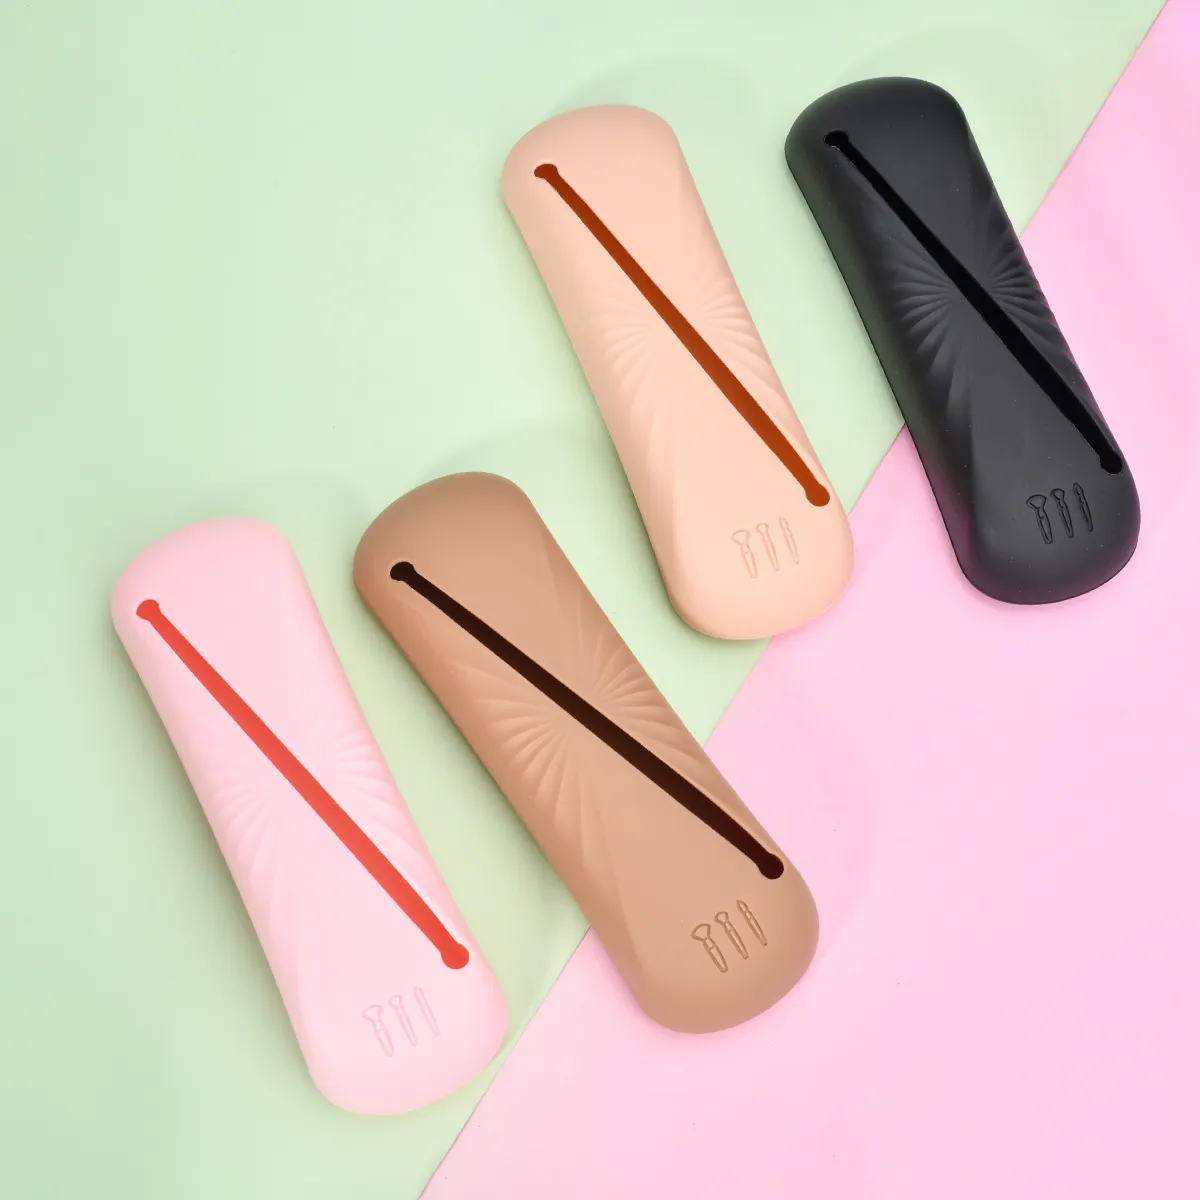 2023 New arrive portable silicone makeup brush travel case makeup brush holder for all brush storage